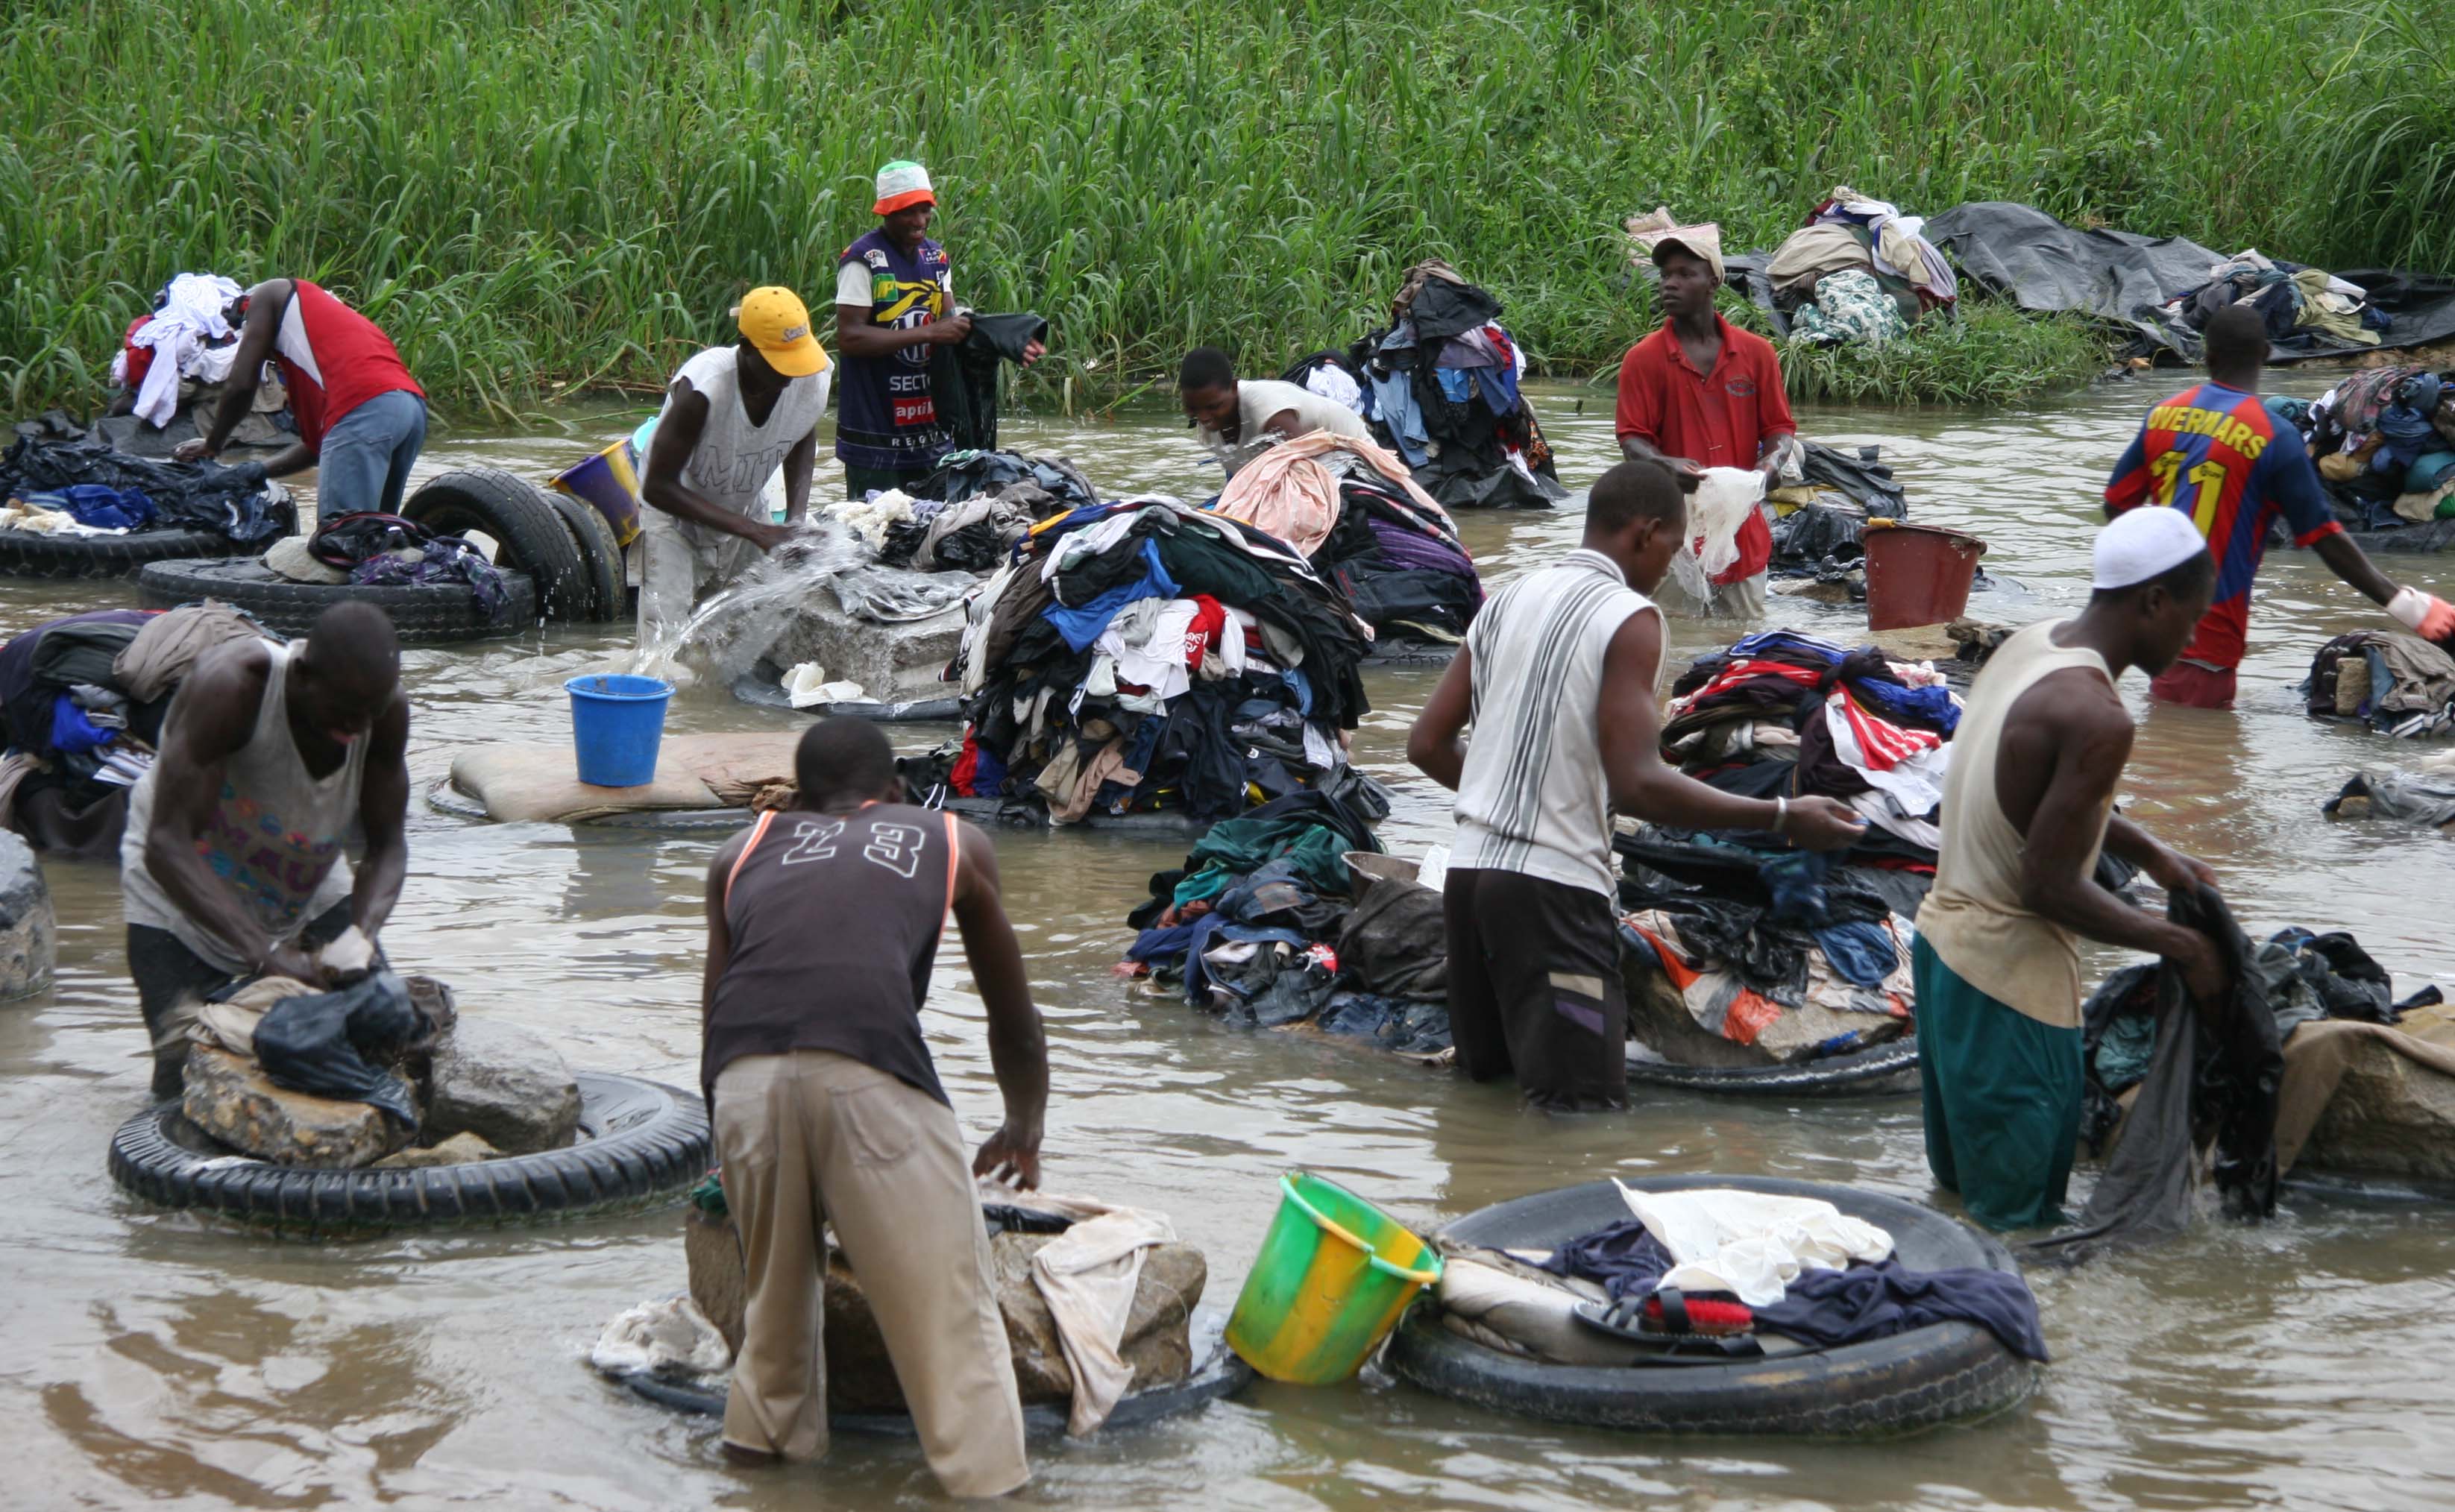 Laundry in the river in Abidjan, Ivory Coast.